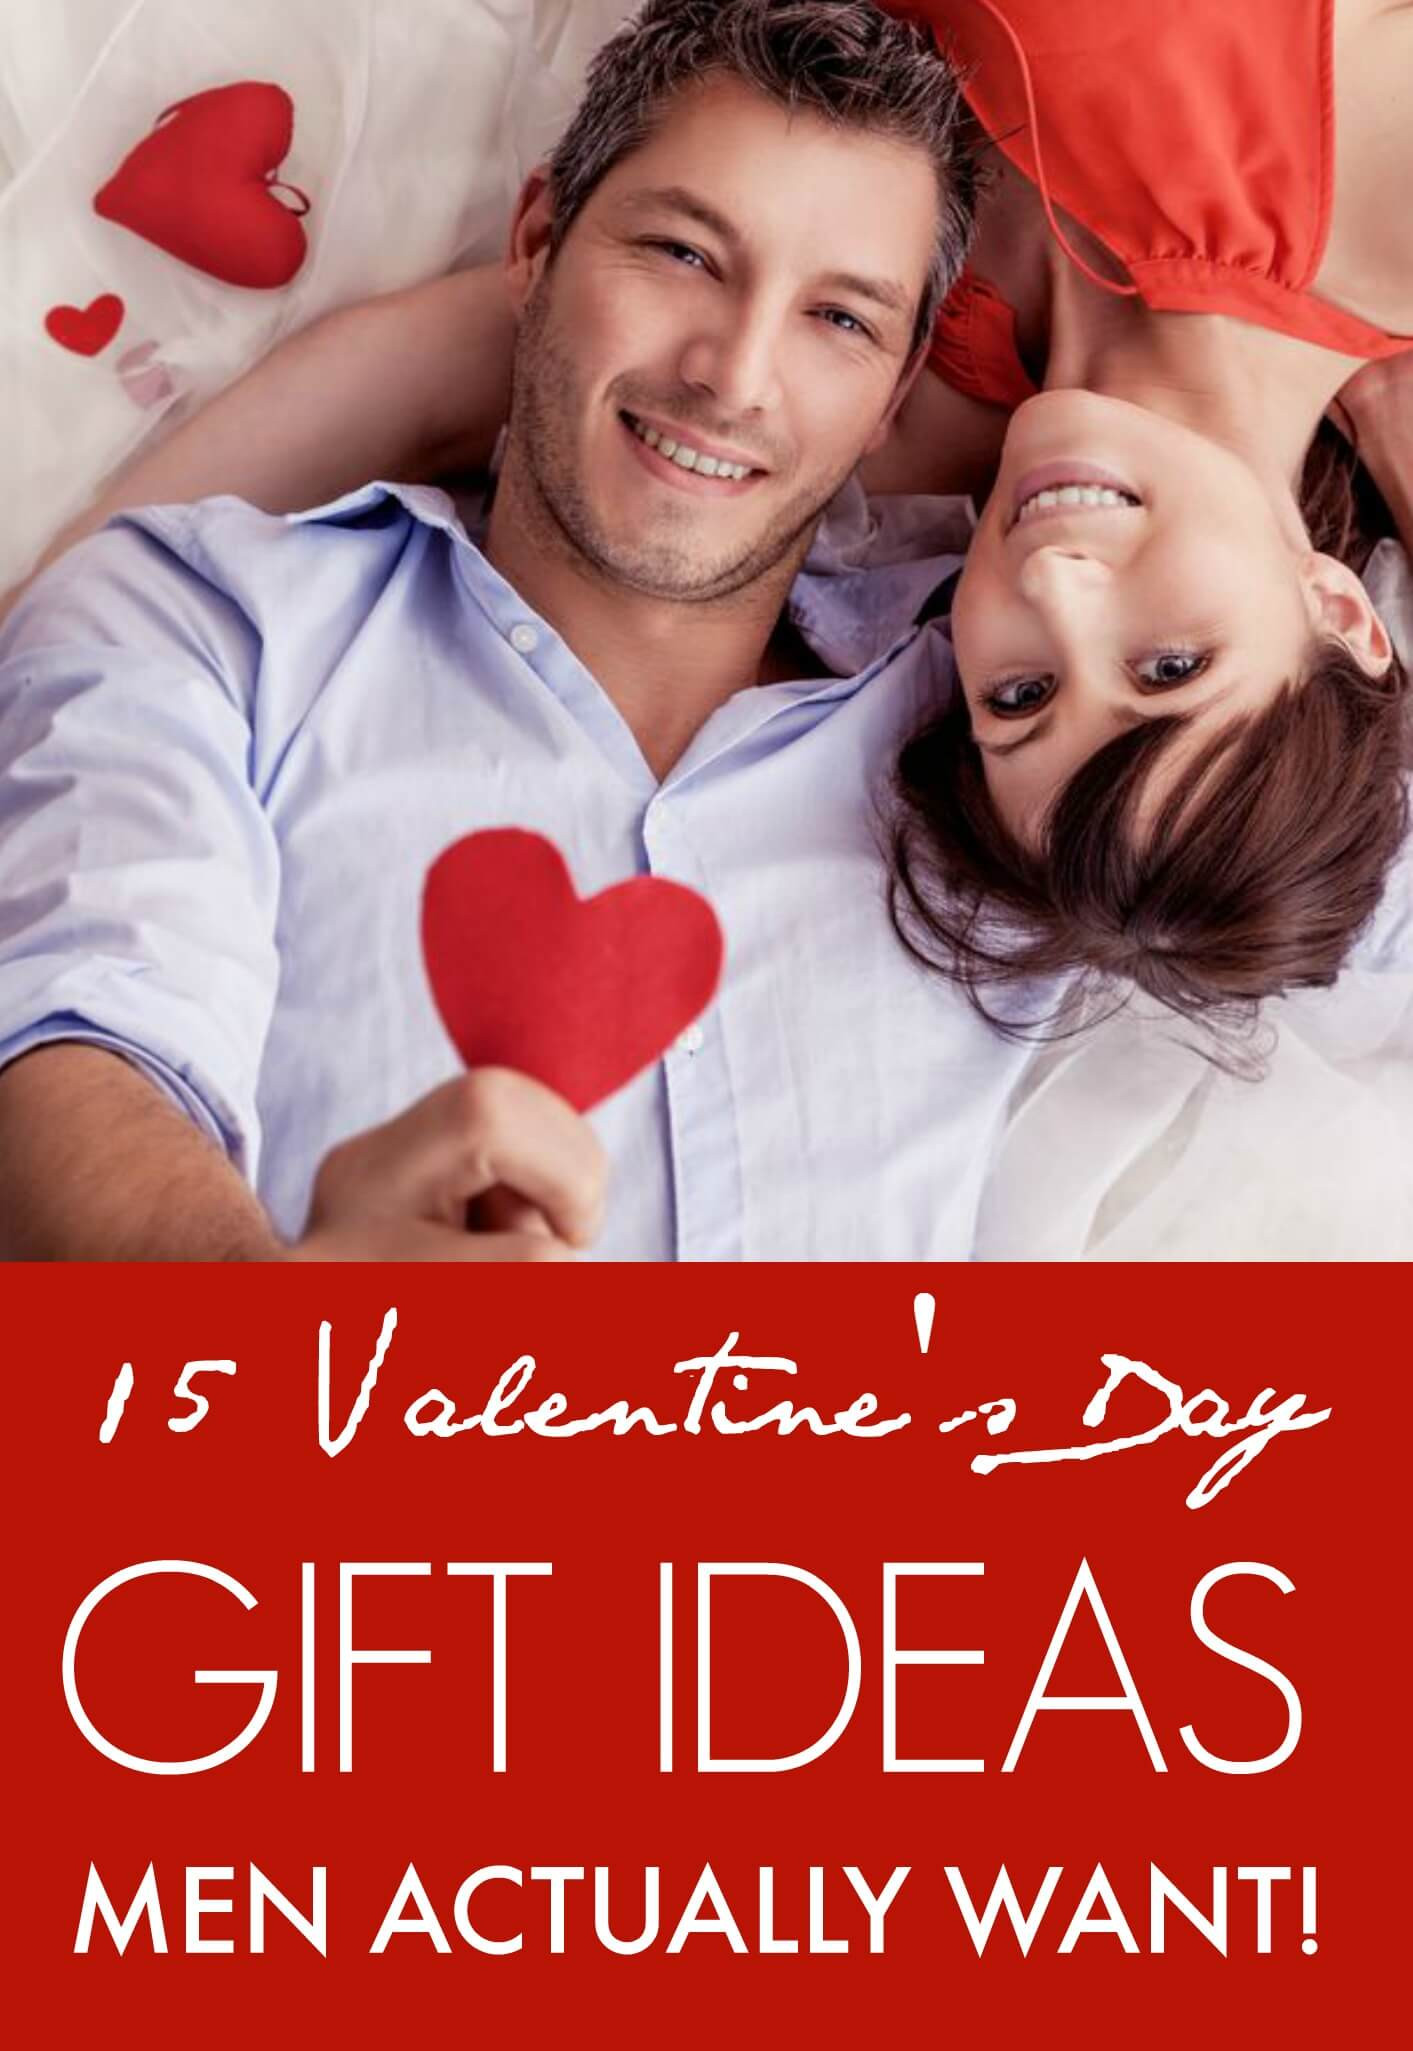 Valentines Day Gift Idea For Men
 15 Valentine’s Day Gift ideas Men Actually Want